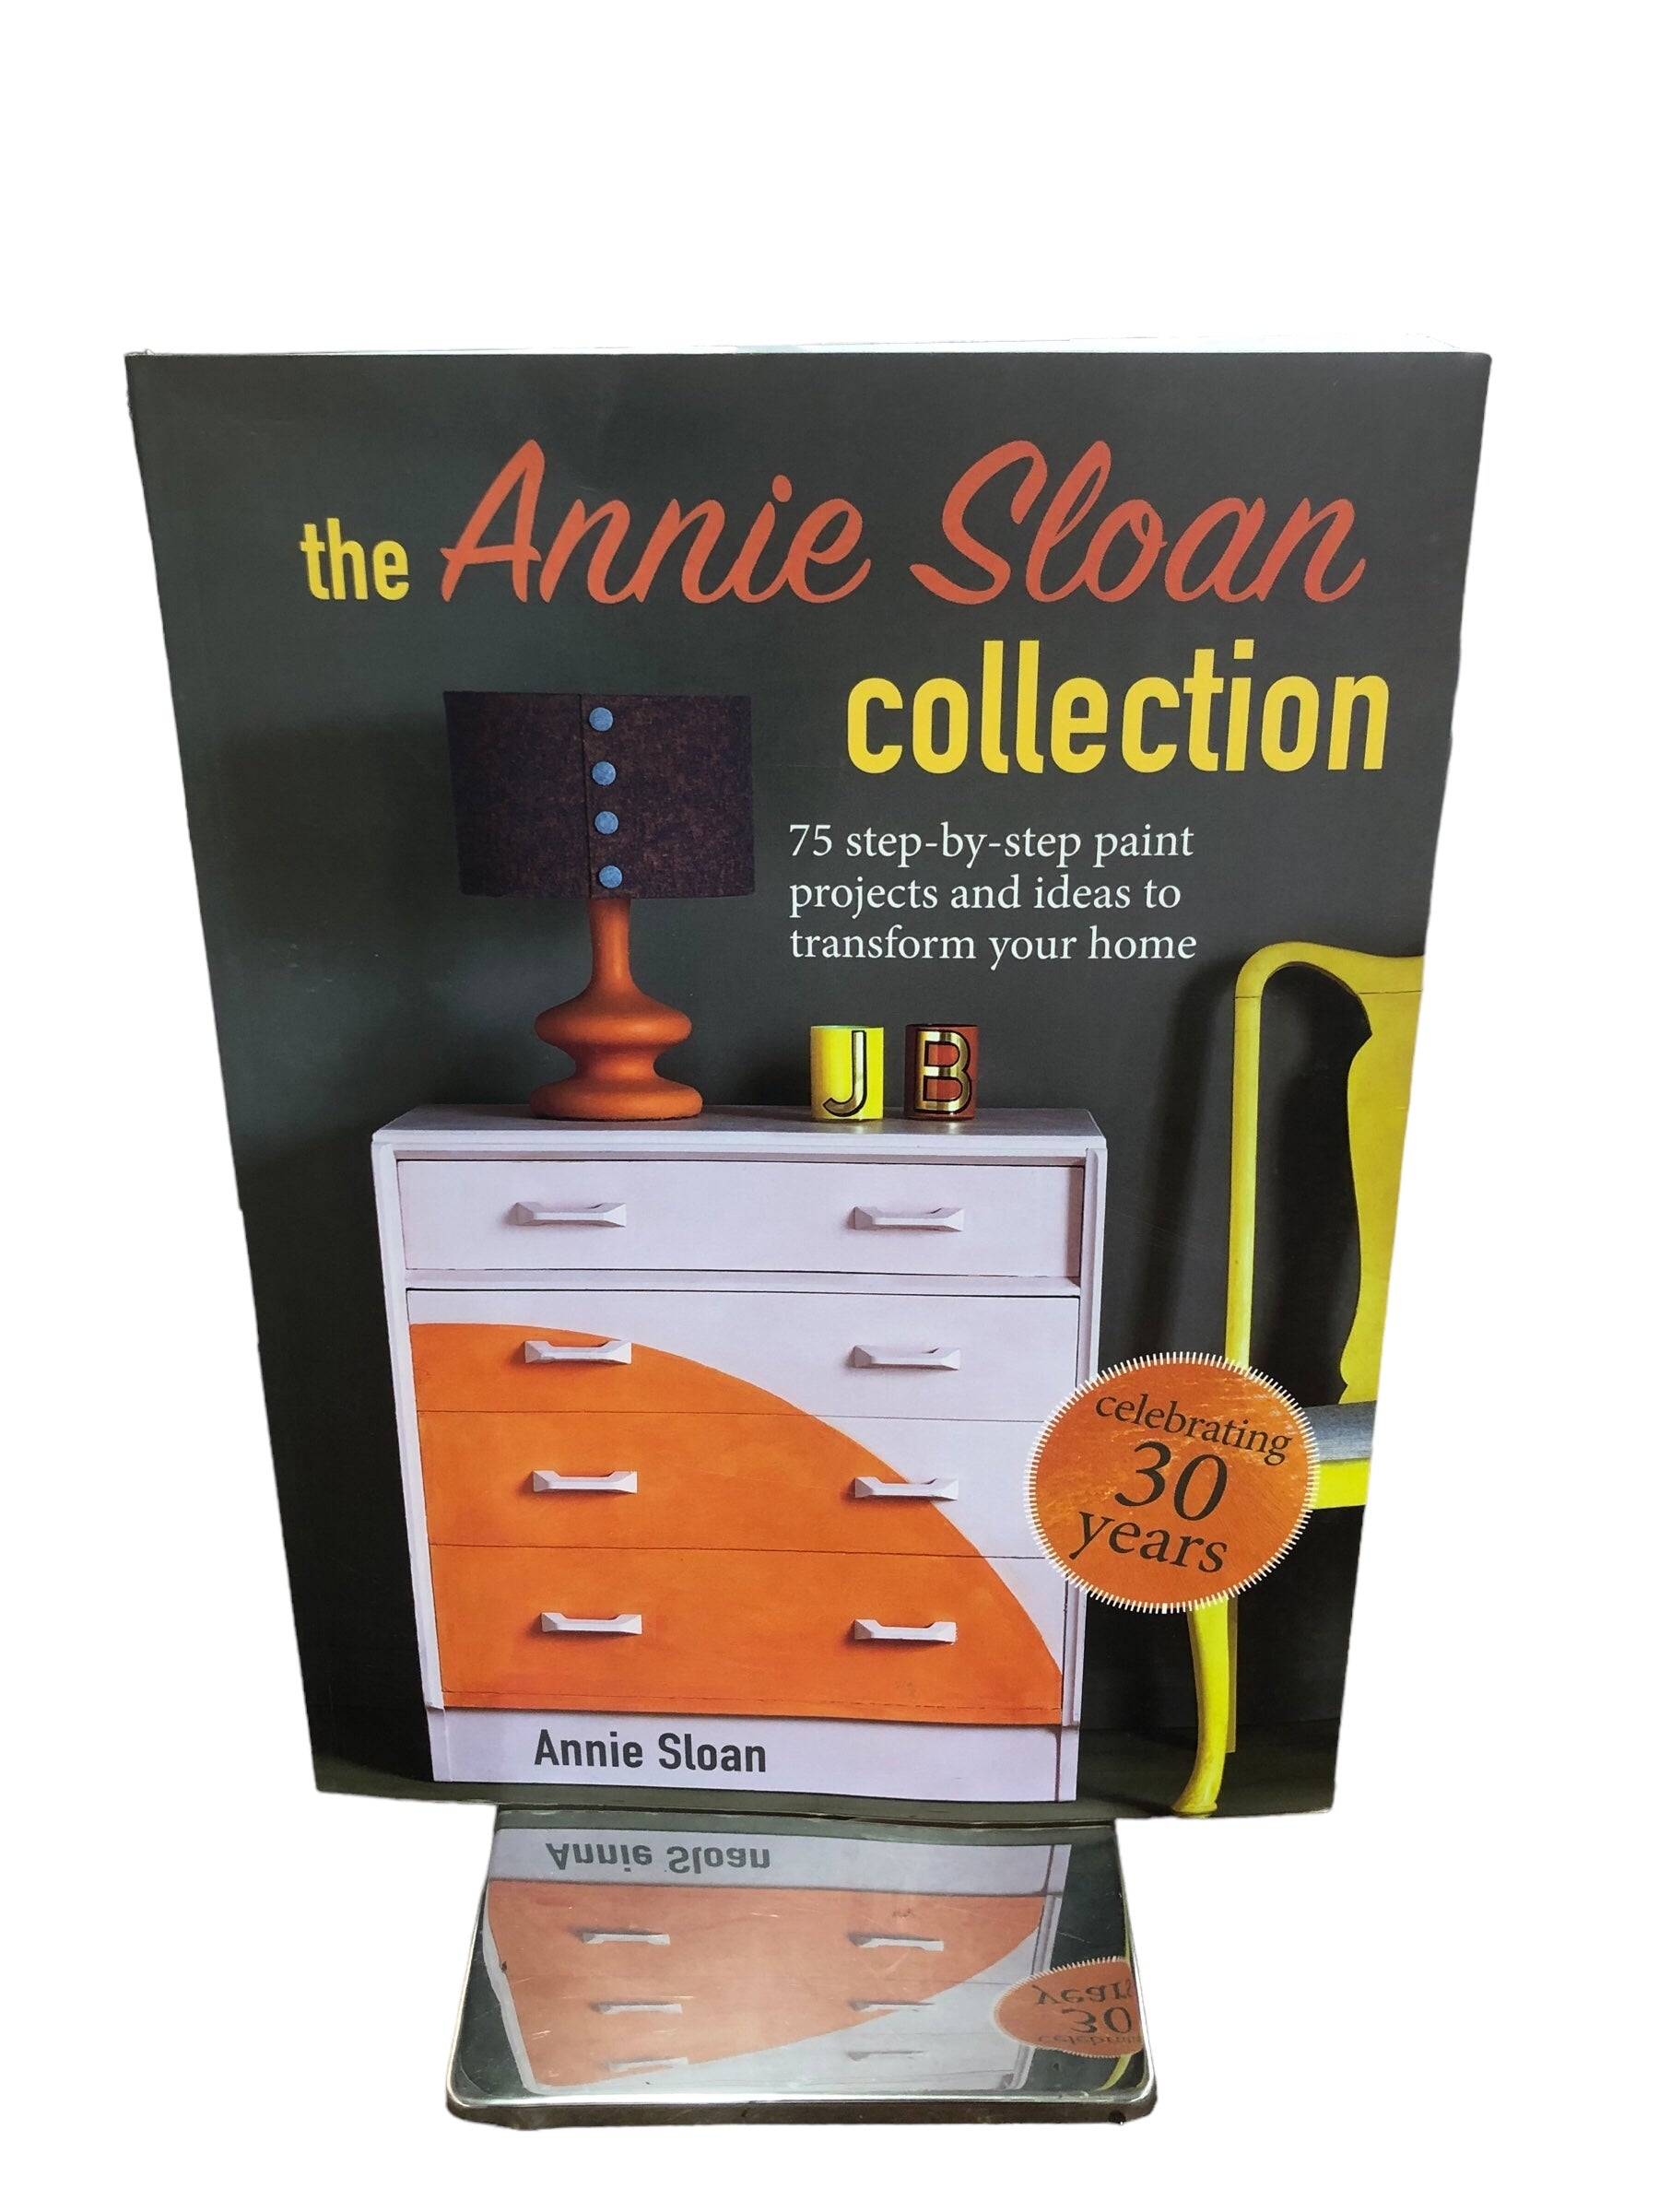 the collection book